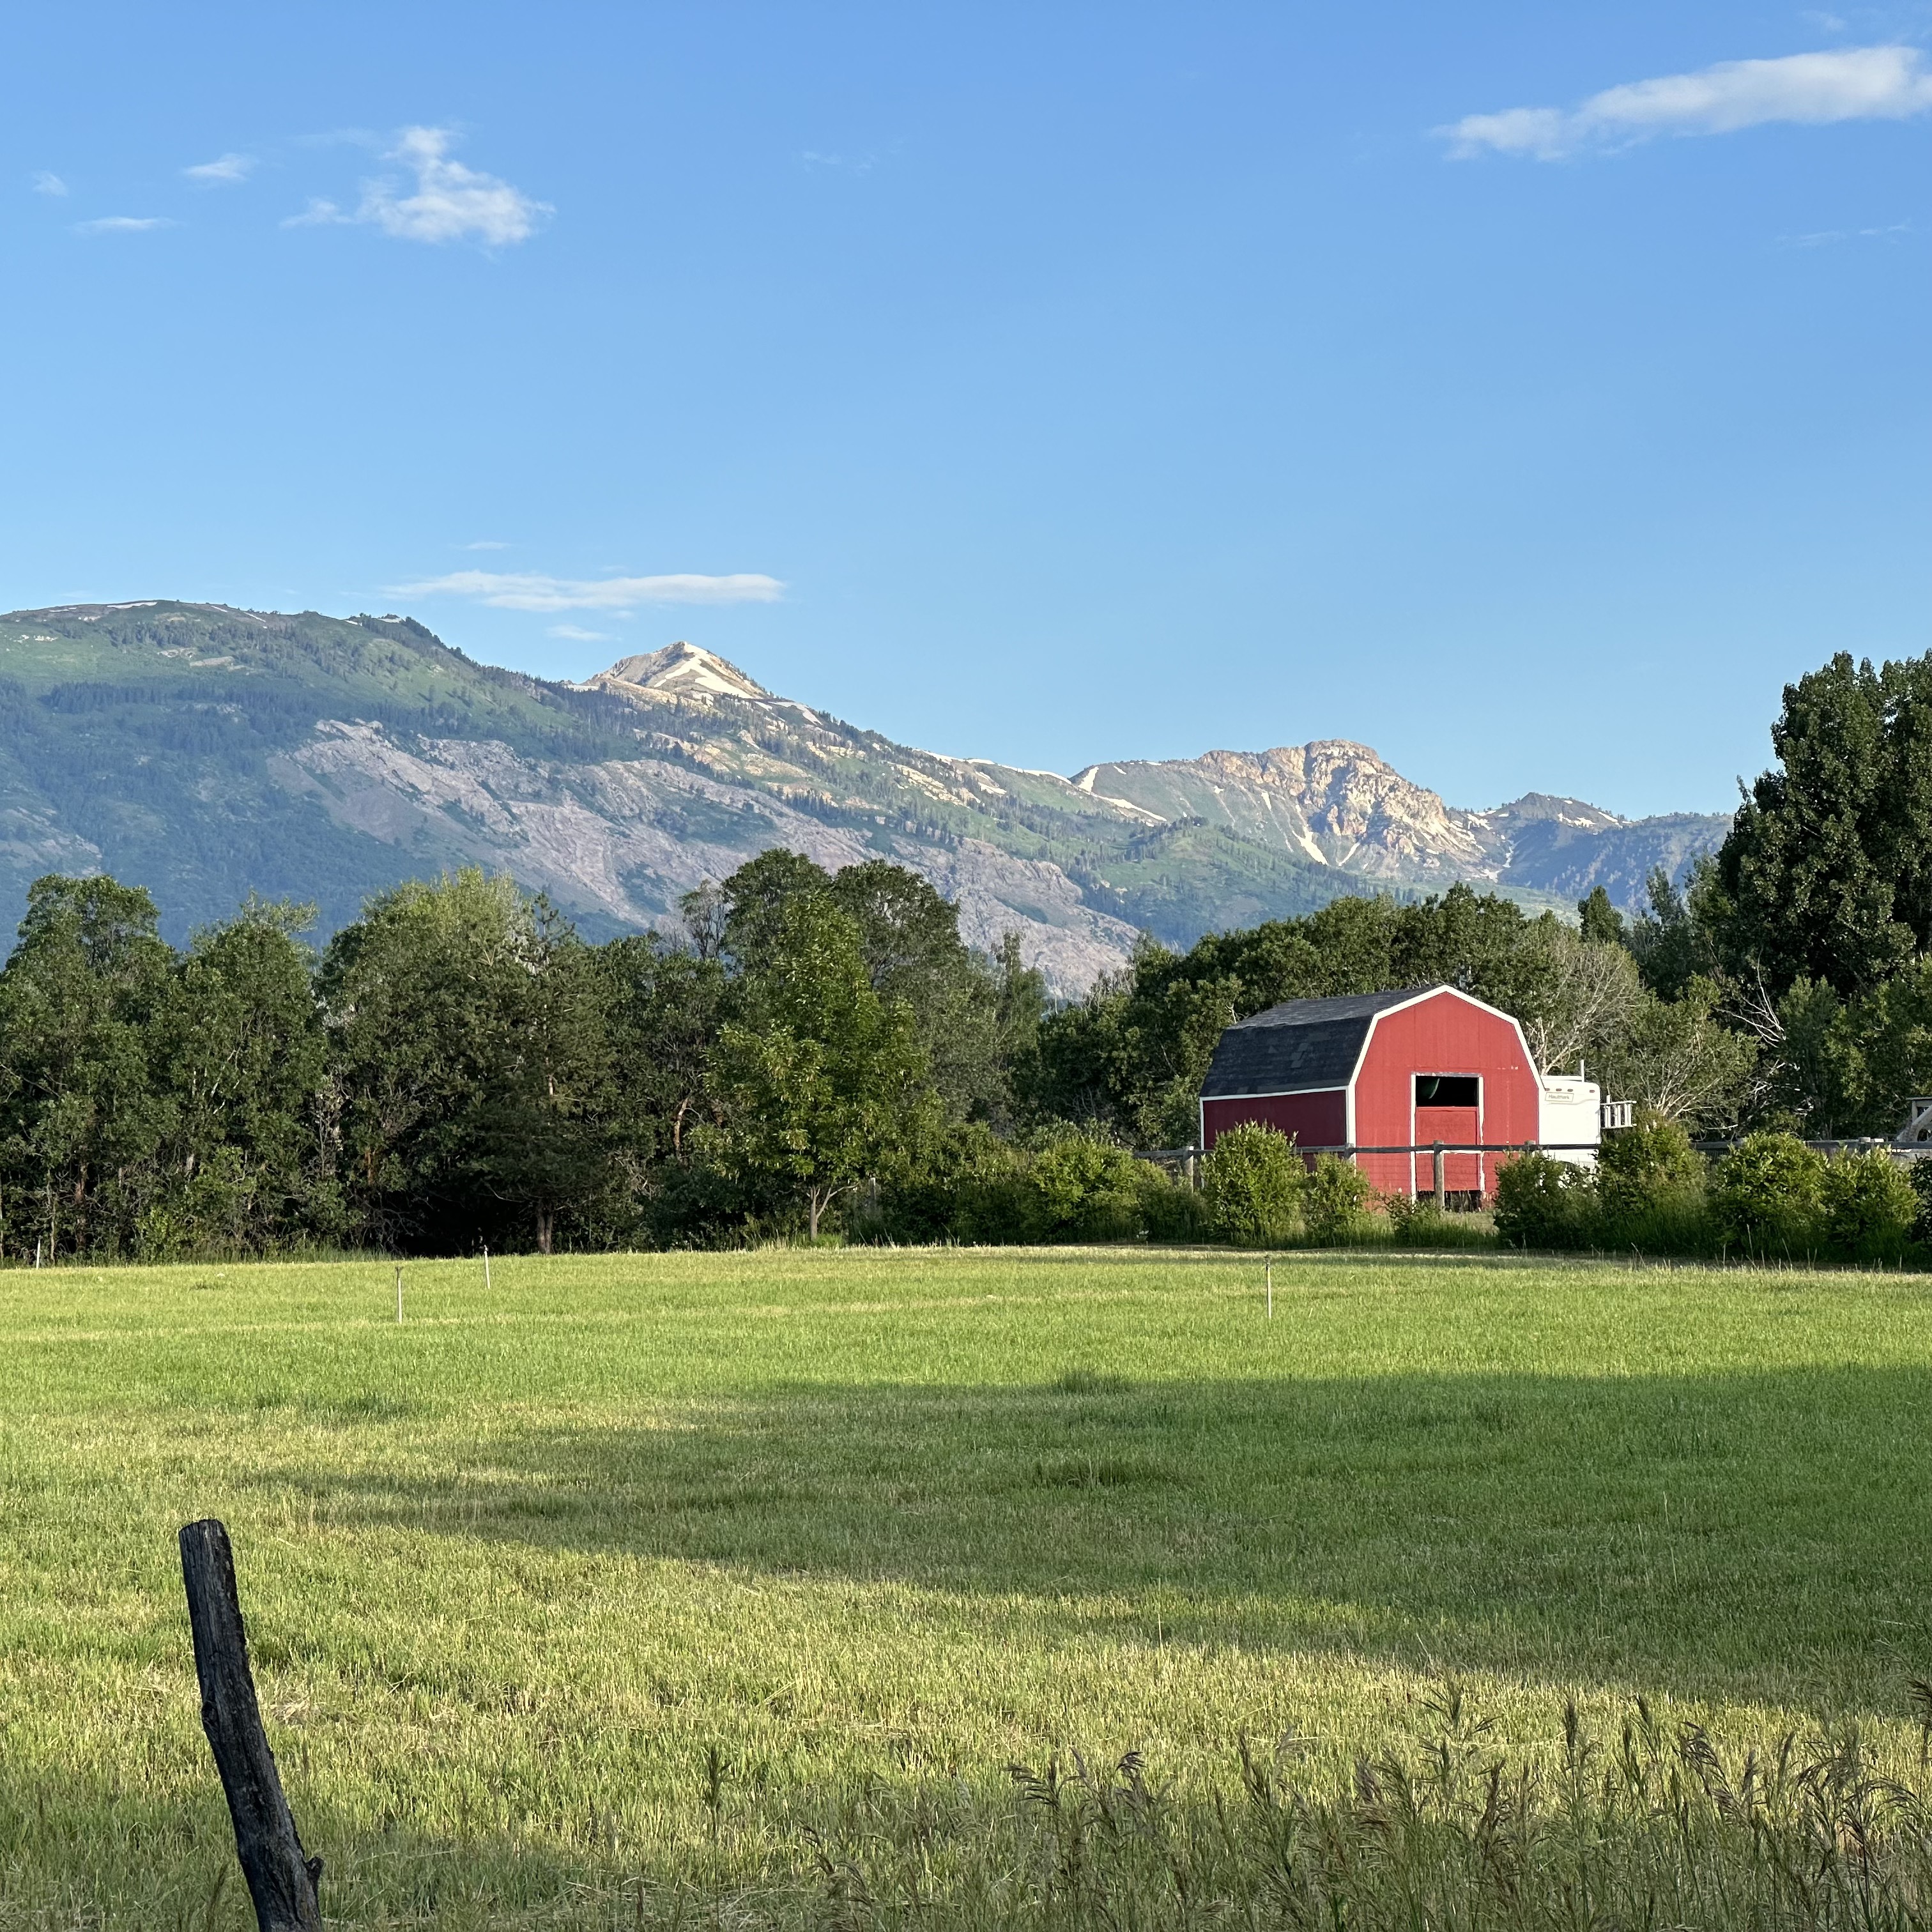 A red barn sits at the far edge of a green field. In the distance is a set of rocky peaks with snow still on them. 